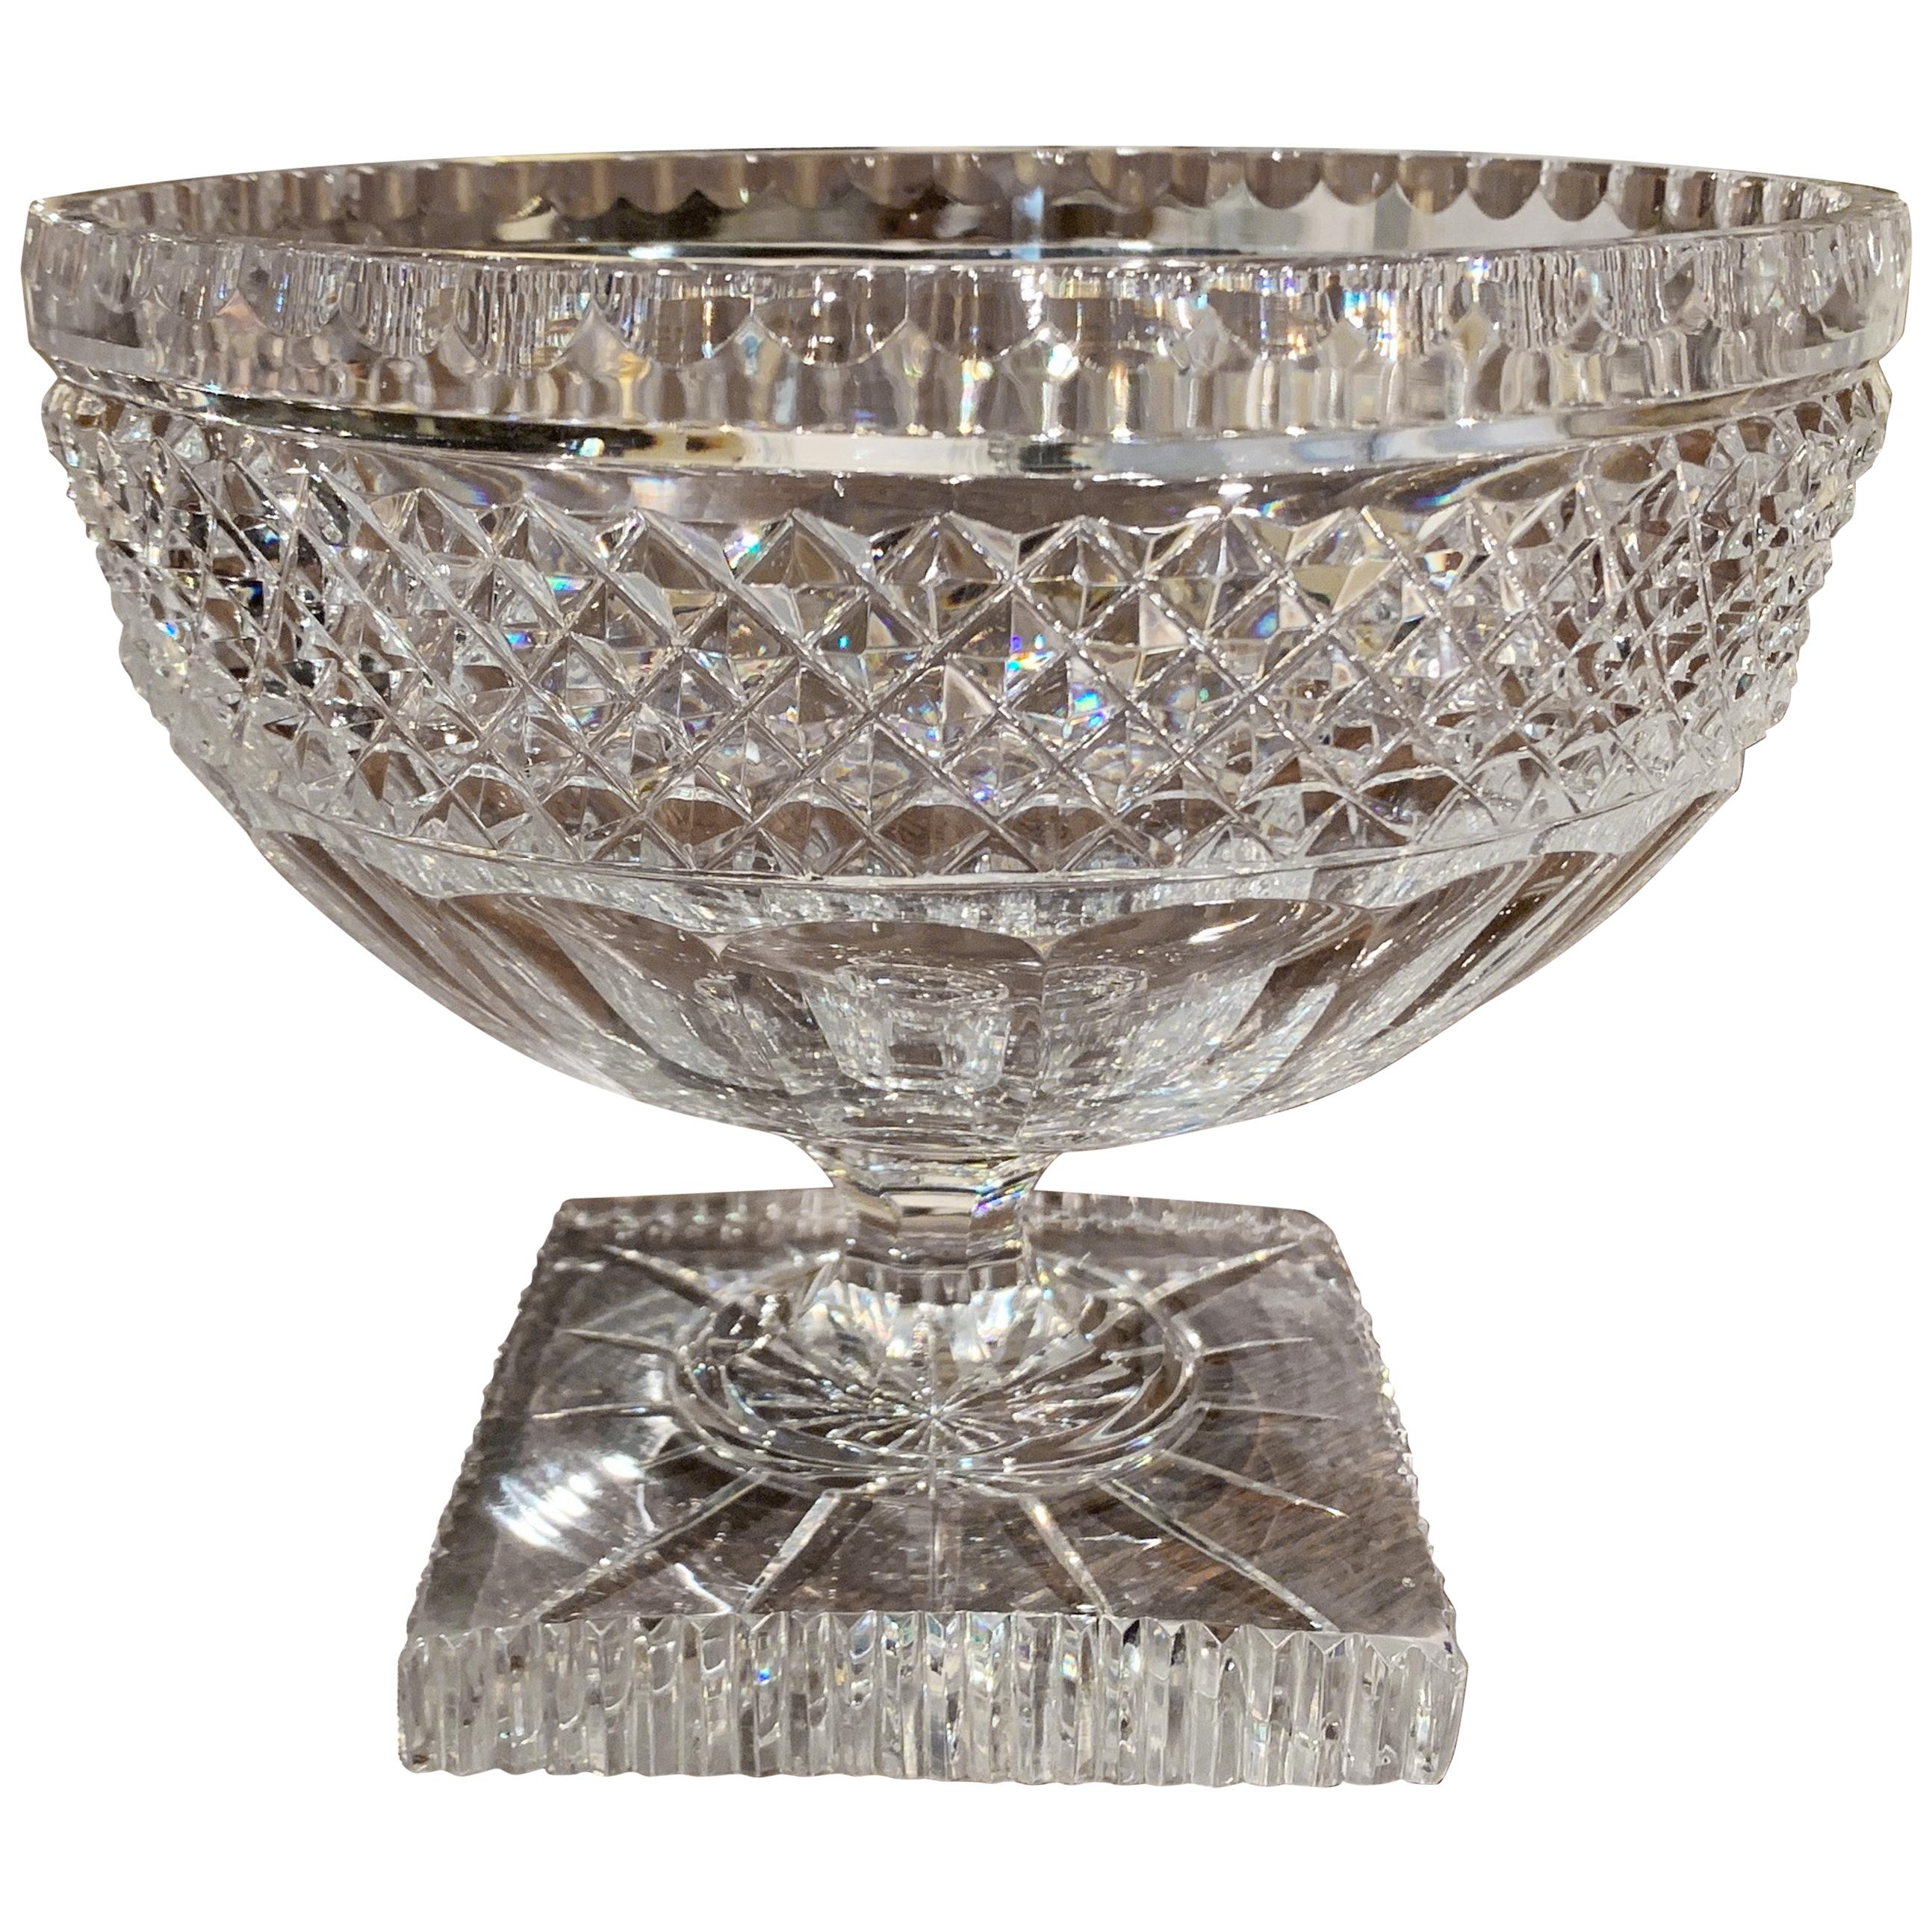 Midcentury French Cut Glass Crystal Decorative Compote Centerpiece Bowl